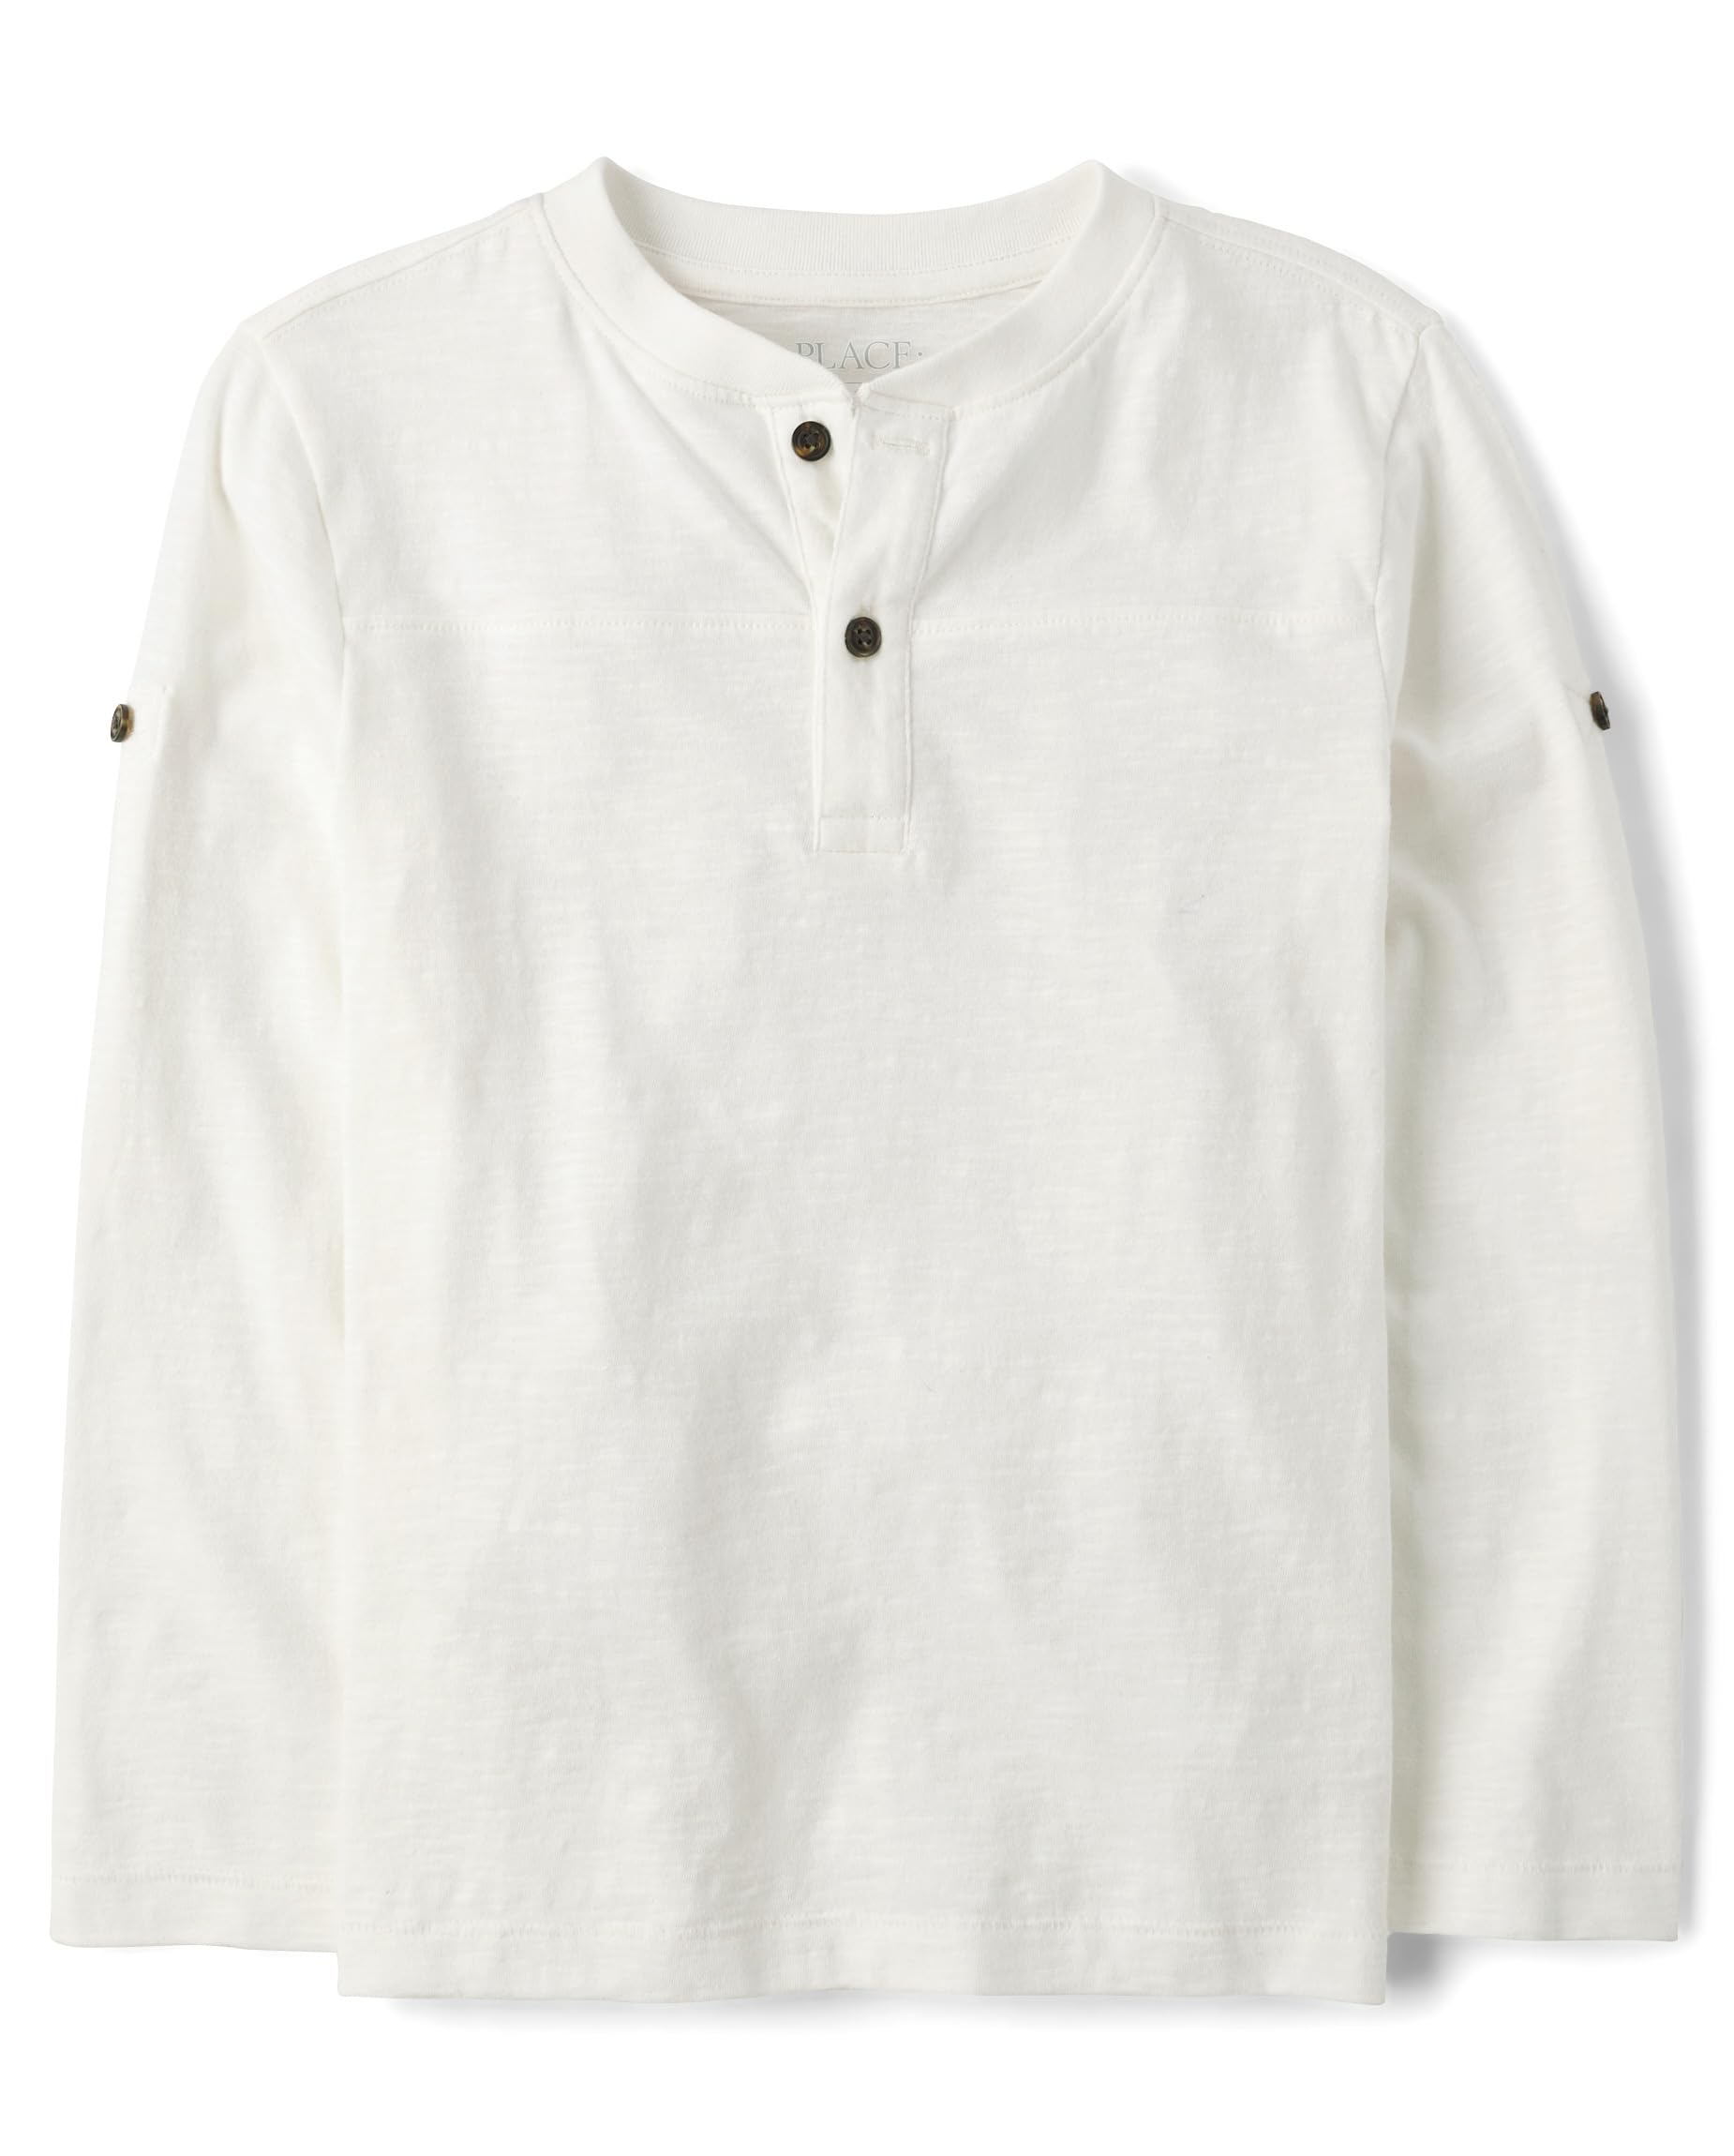 The Children's Place Boys' Long Sleeve Rolled Cuff Henley Shirt